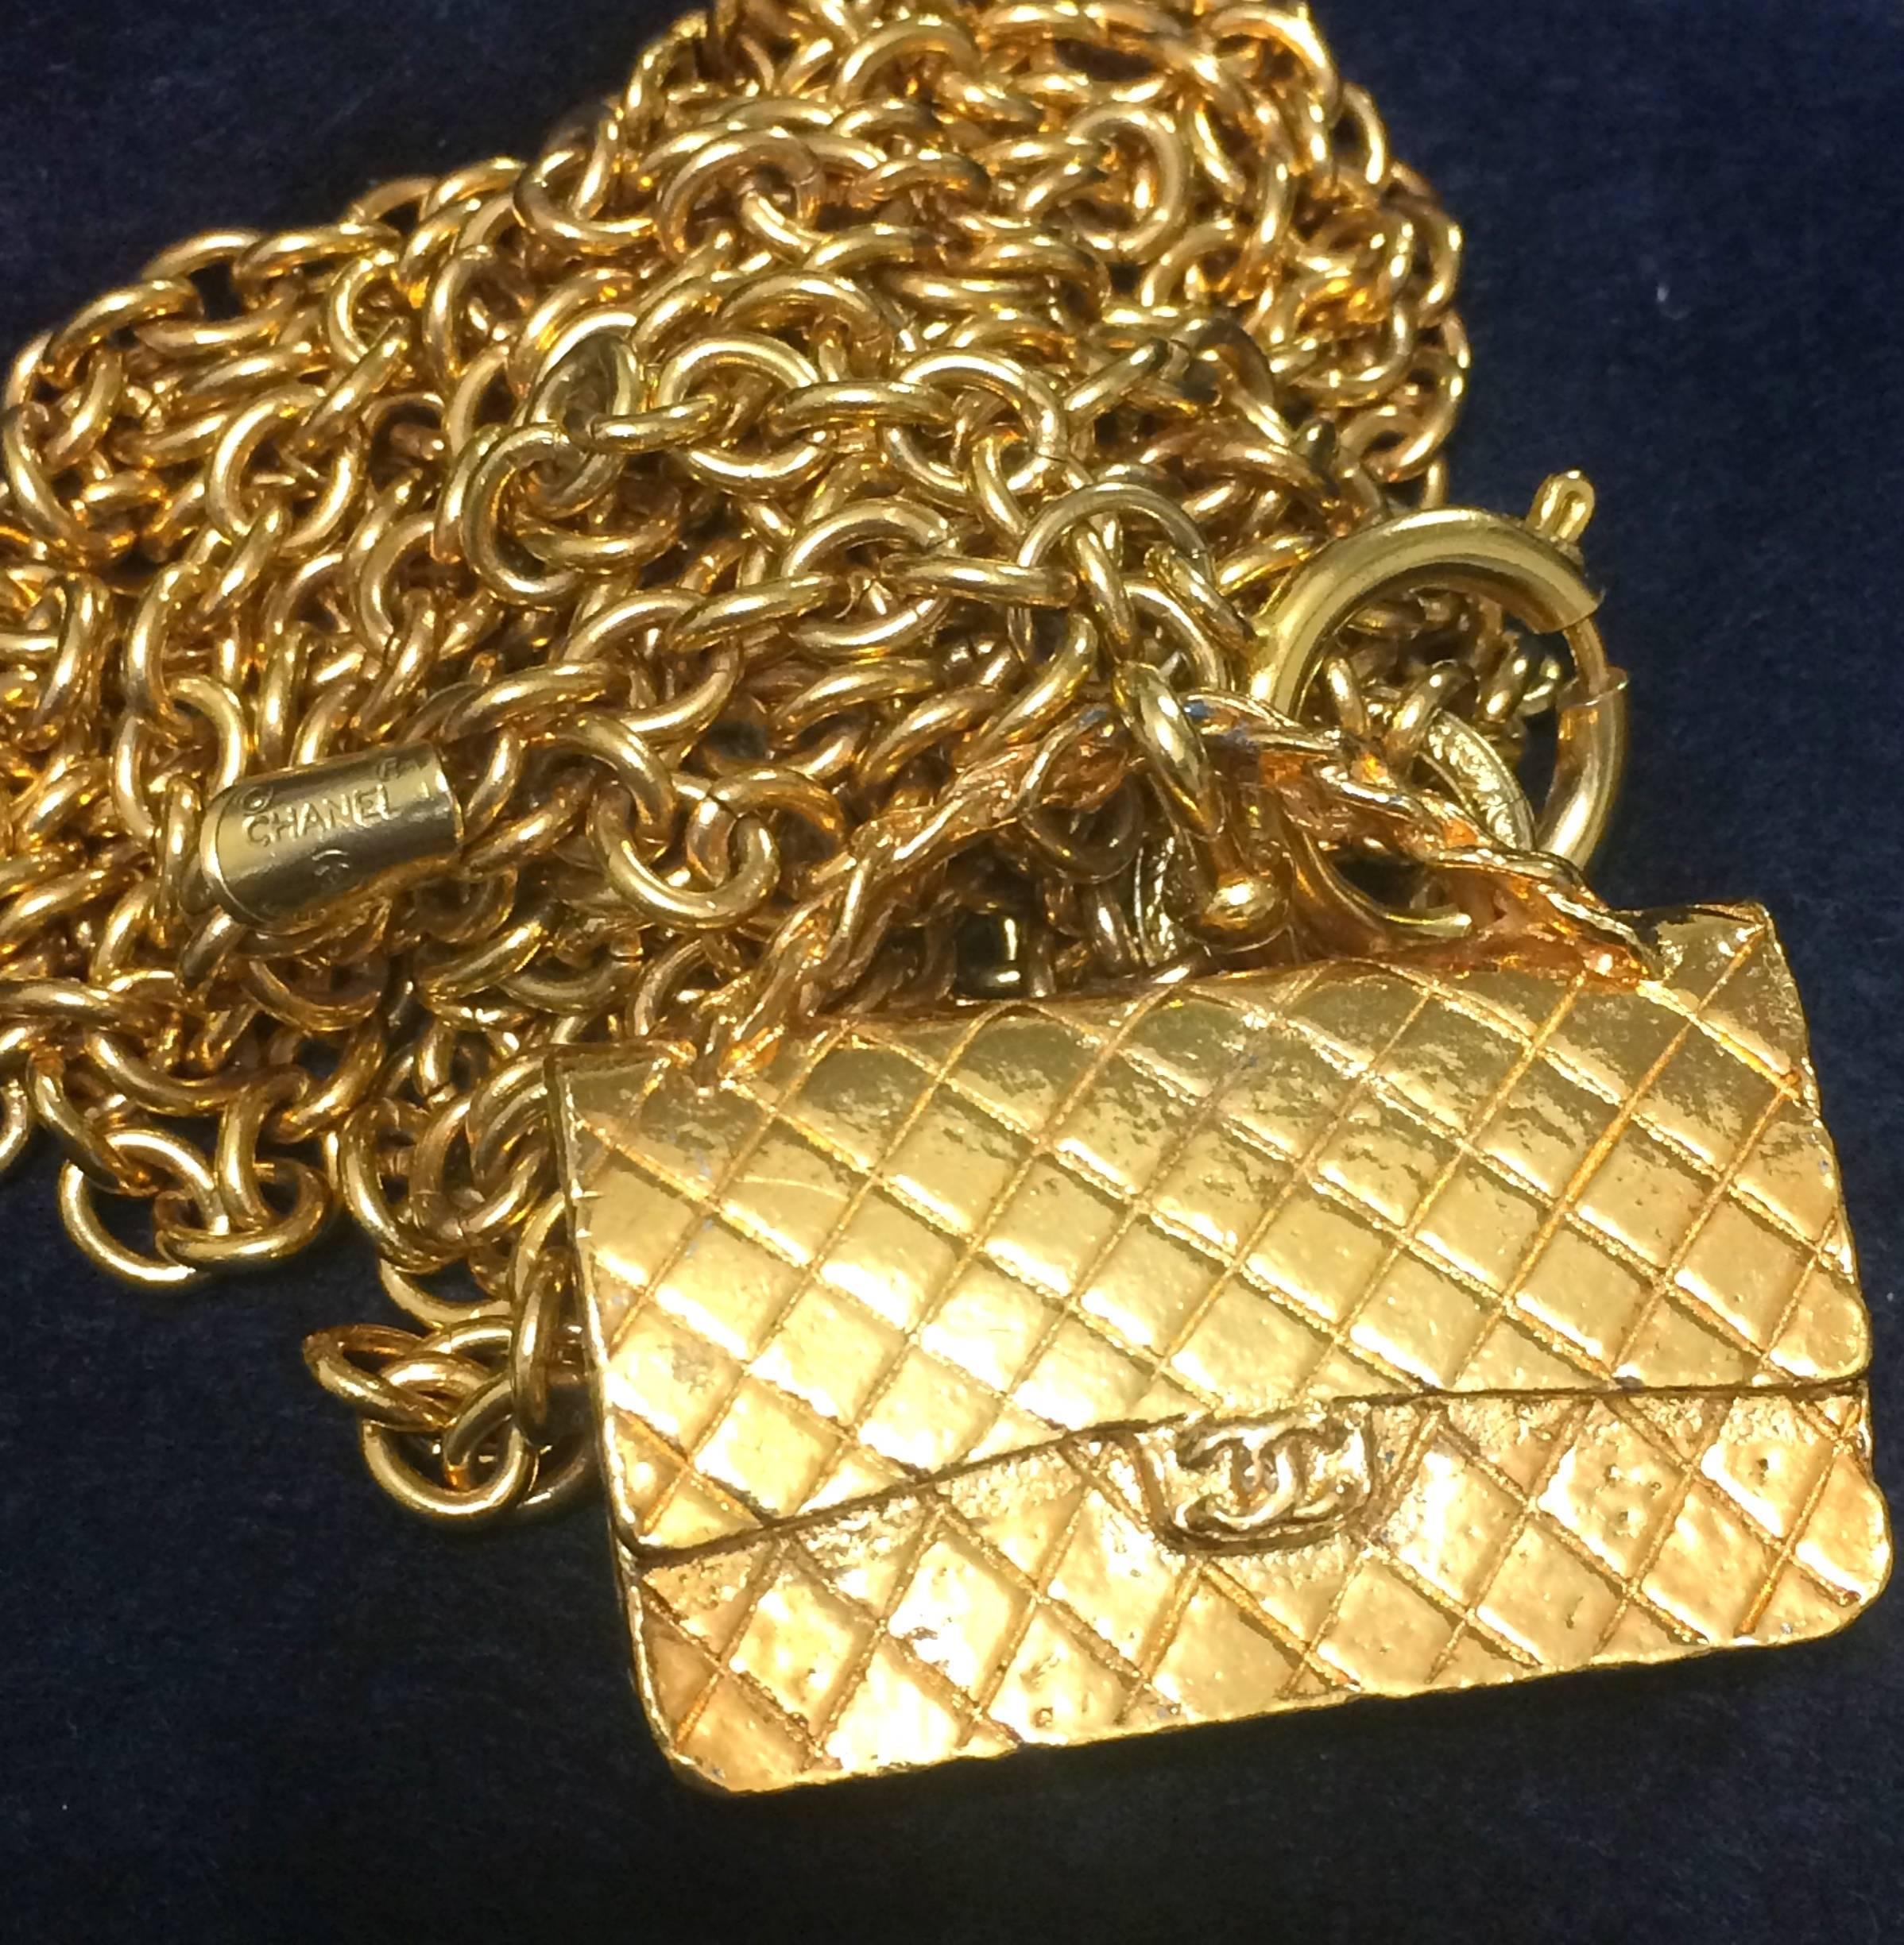 Vintage CHANEL golden double chain long necklace with classic 2.55 bag charm. 5